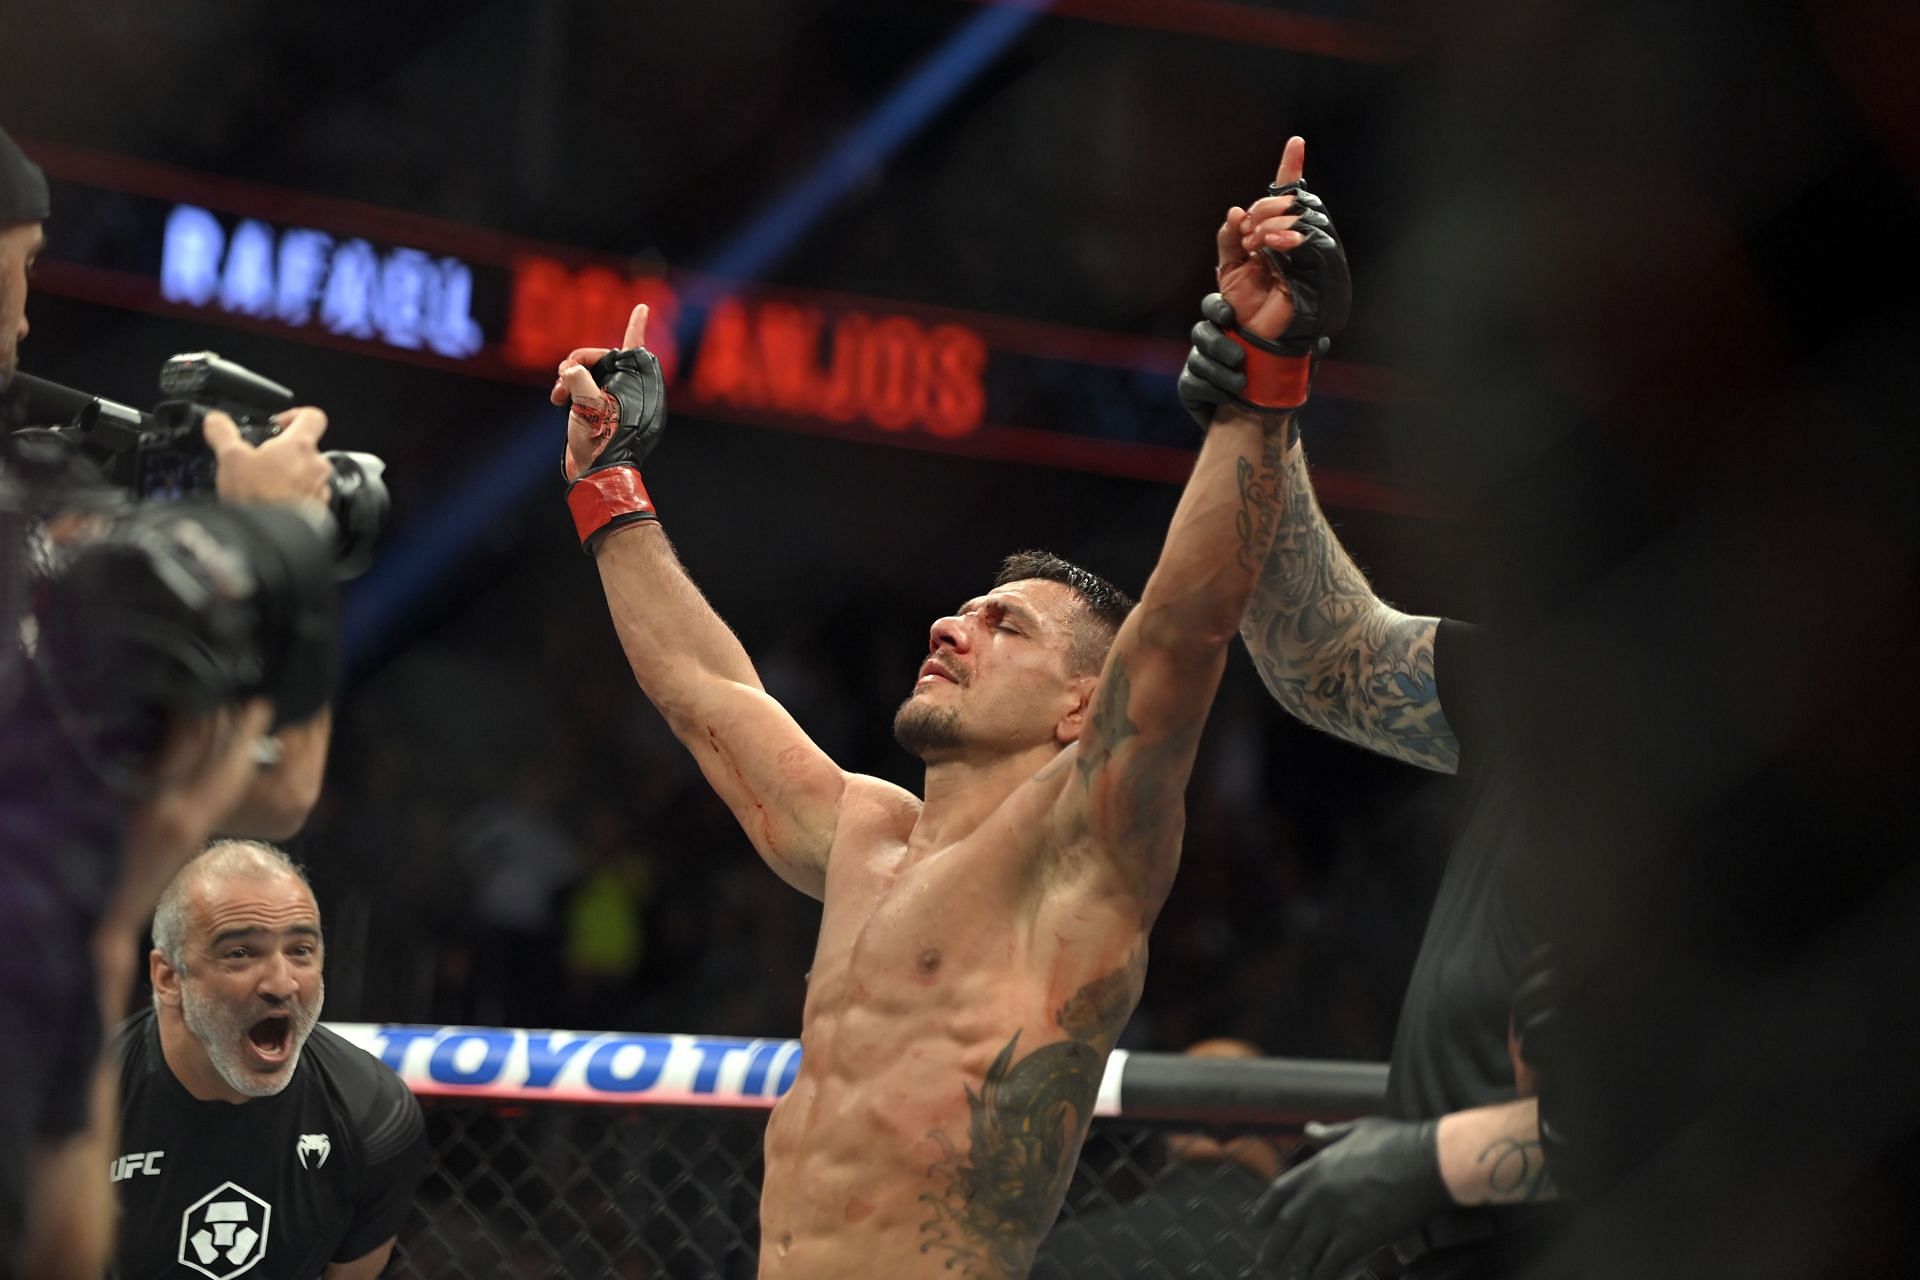 Rafael Dos Anjos will be hopeful of entering into contention at 170lbs